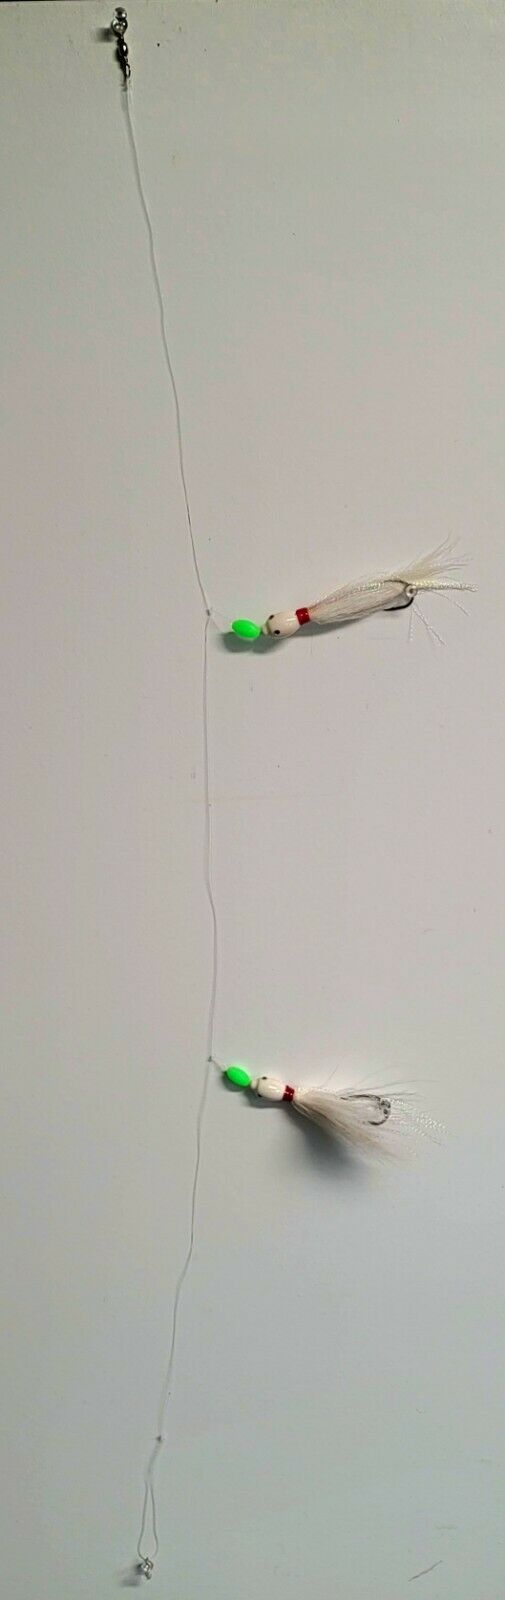 Bucktail Teasers Fishing Hook Fluke Rig Saltwater Fishing jig Plugs Lures  Mylar Flash Bucktail Teasers For Salmon Trout Bass